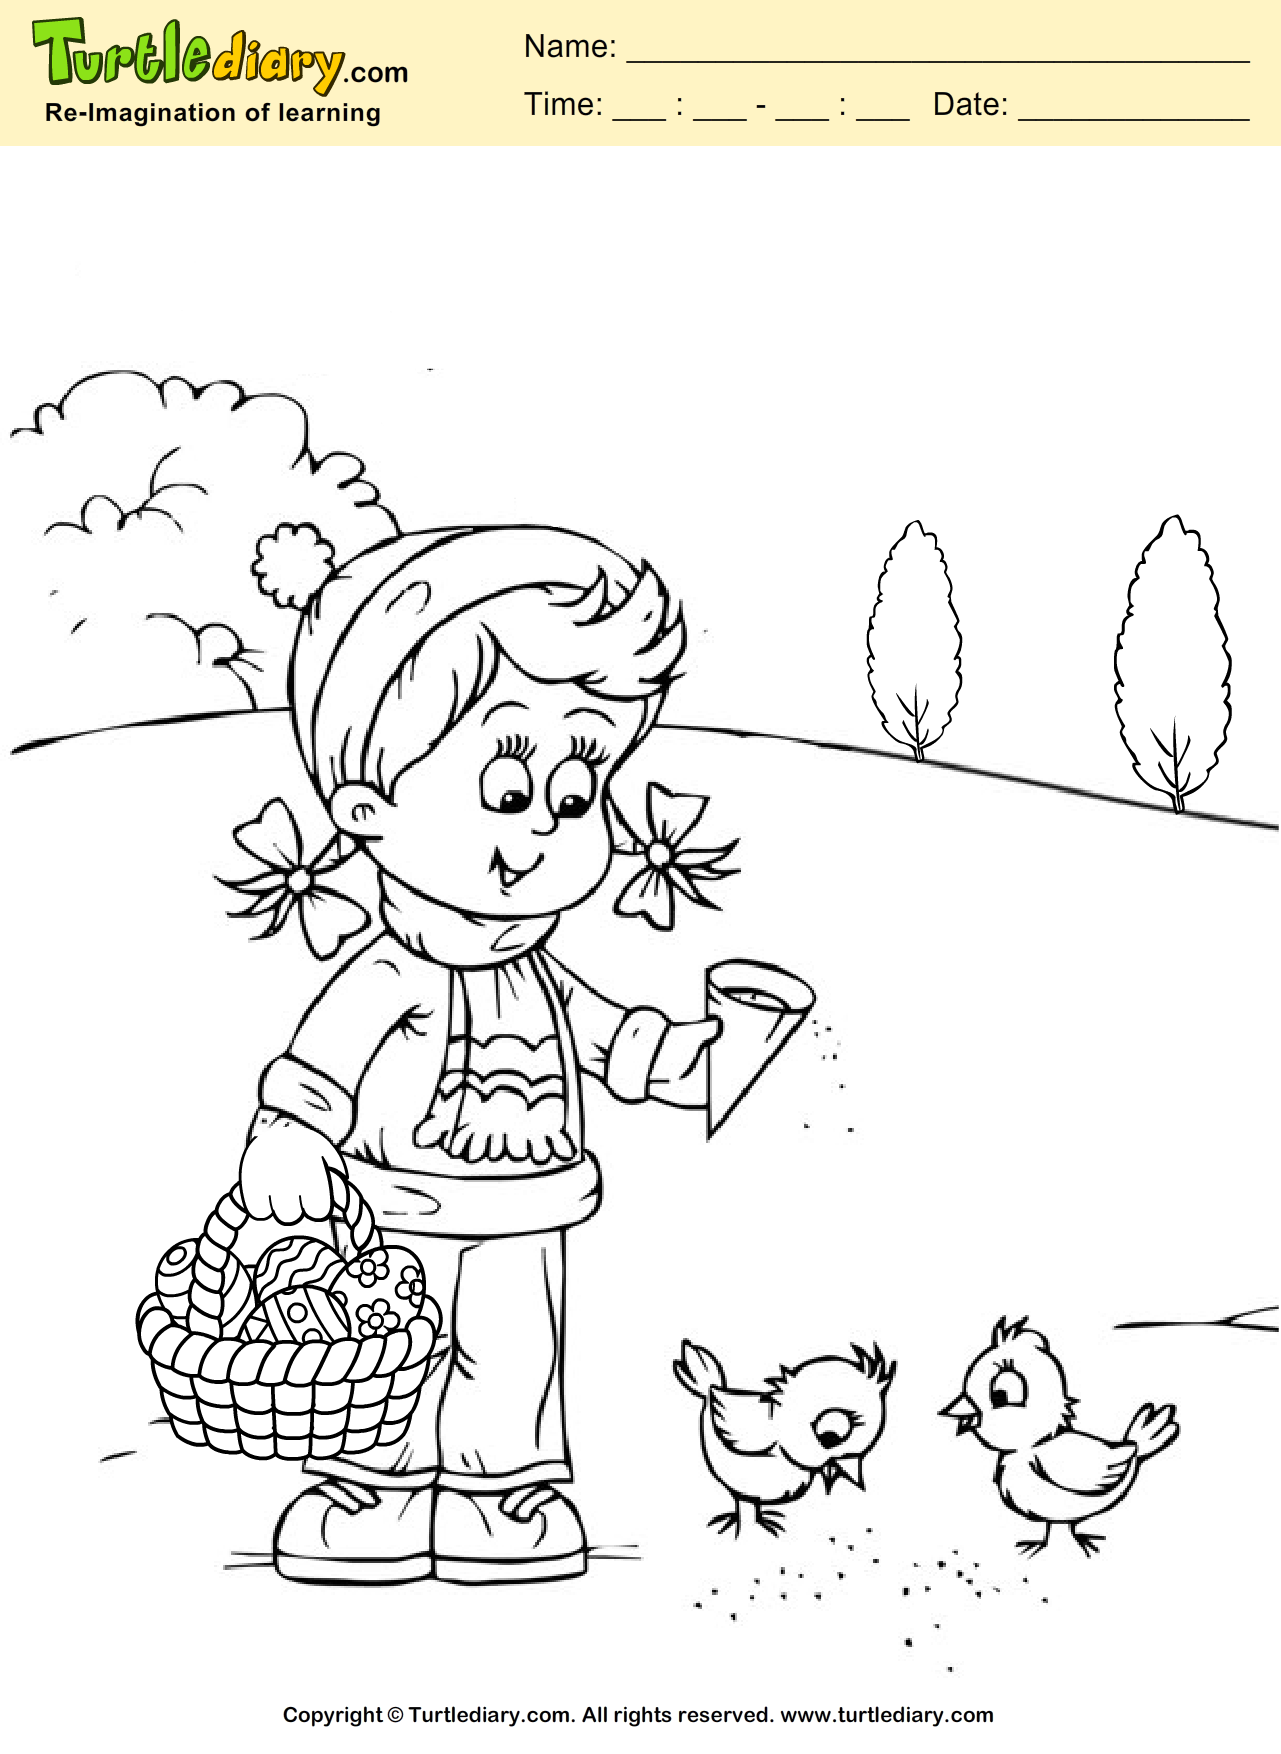 Happy Easter Coloring Sheet